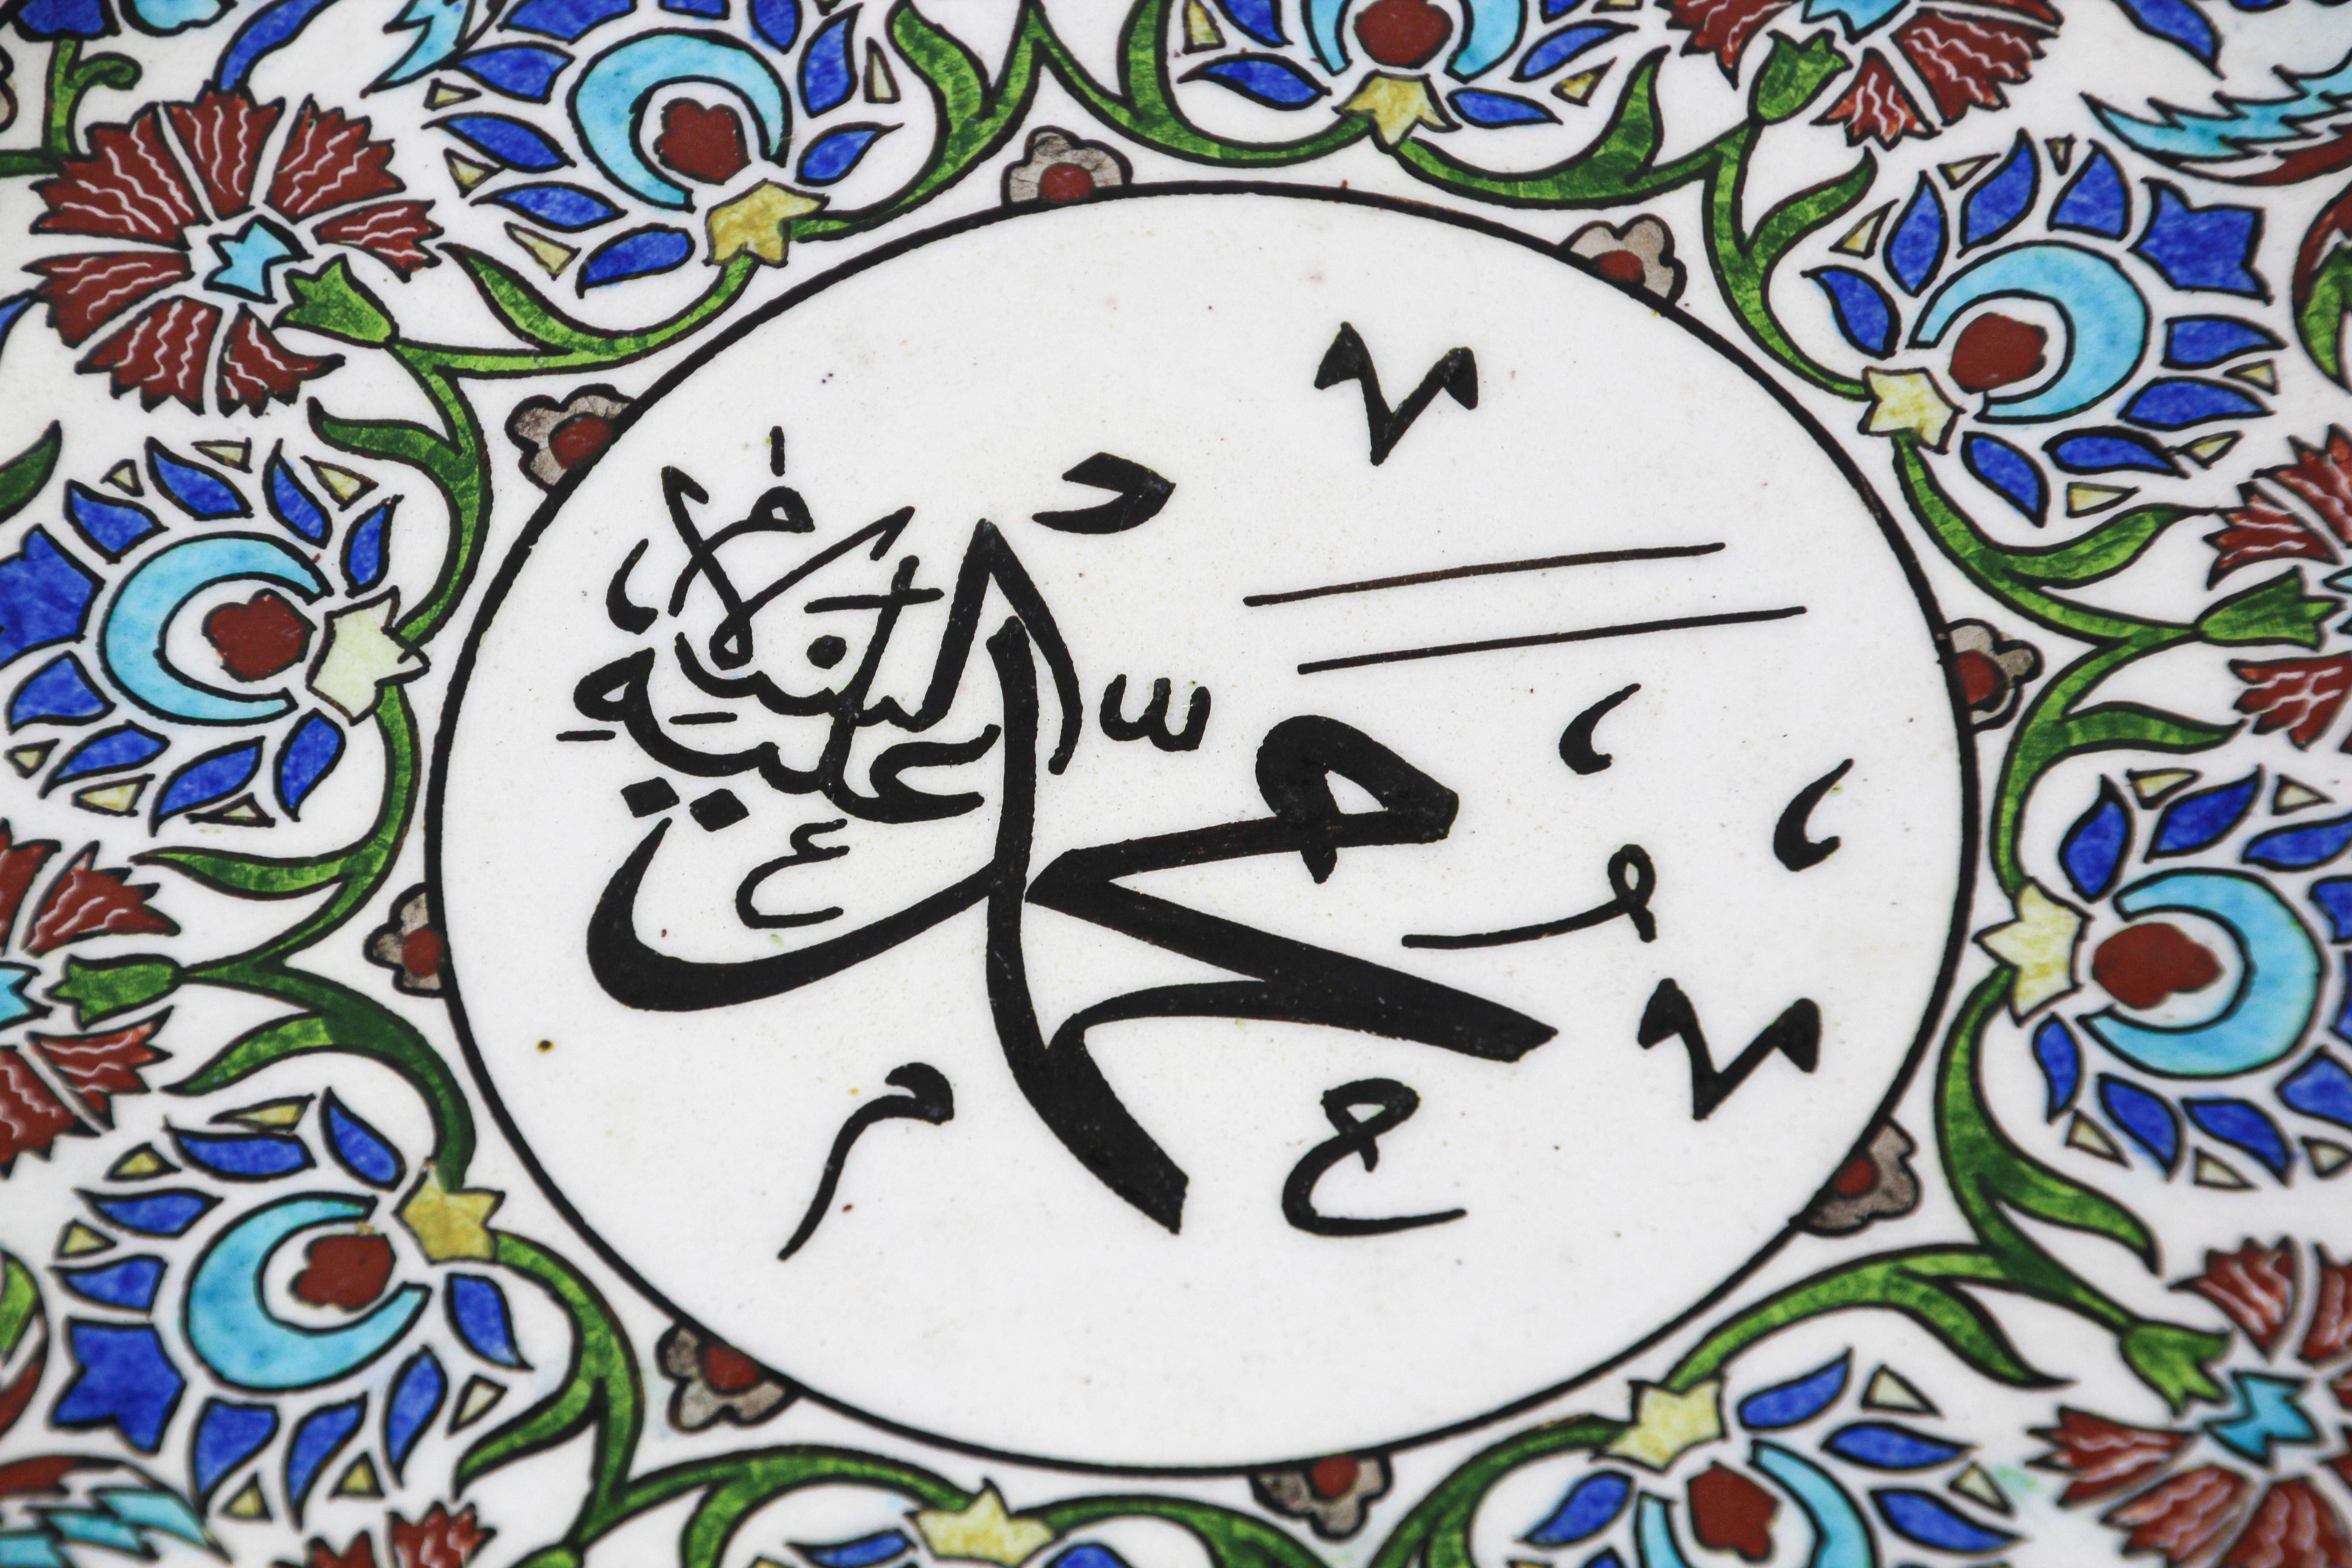 Hand-Painted Hand Painted Polychrome TurkishCeramic Decorative Plate with Islamic Calligraphy